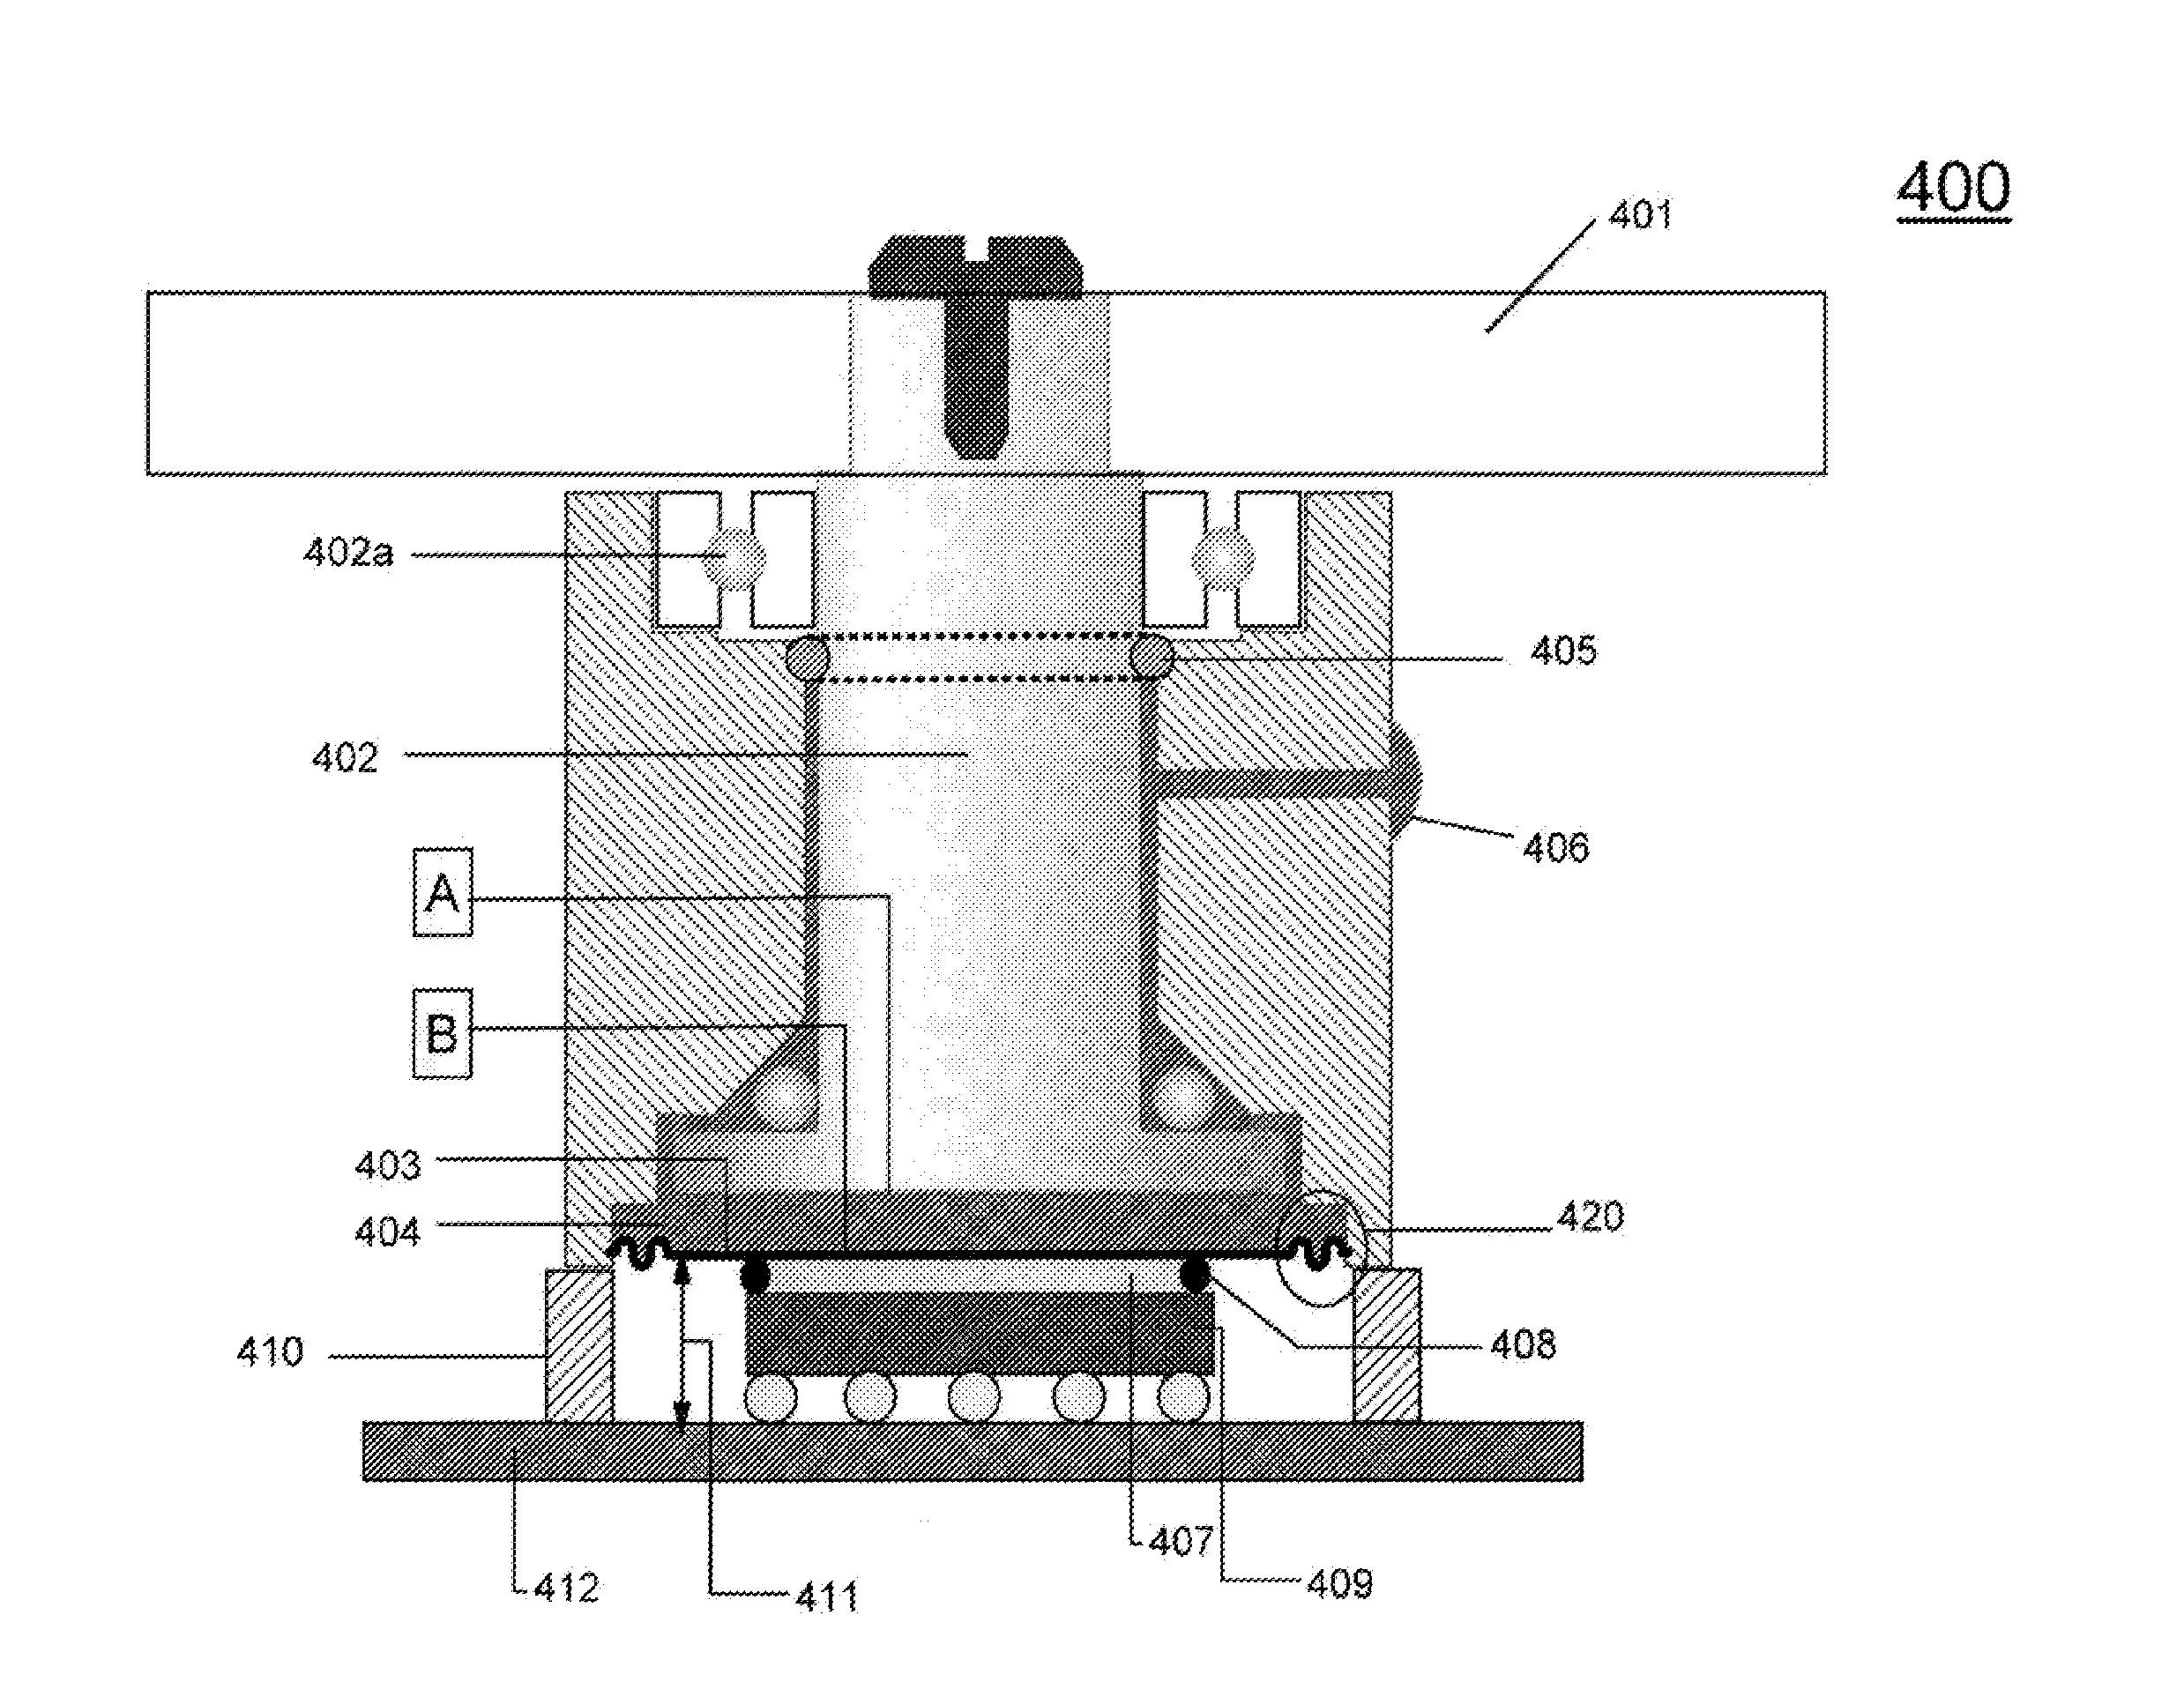 Heat transfer apparatus containing a compliant fluid film interface and method therefor